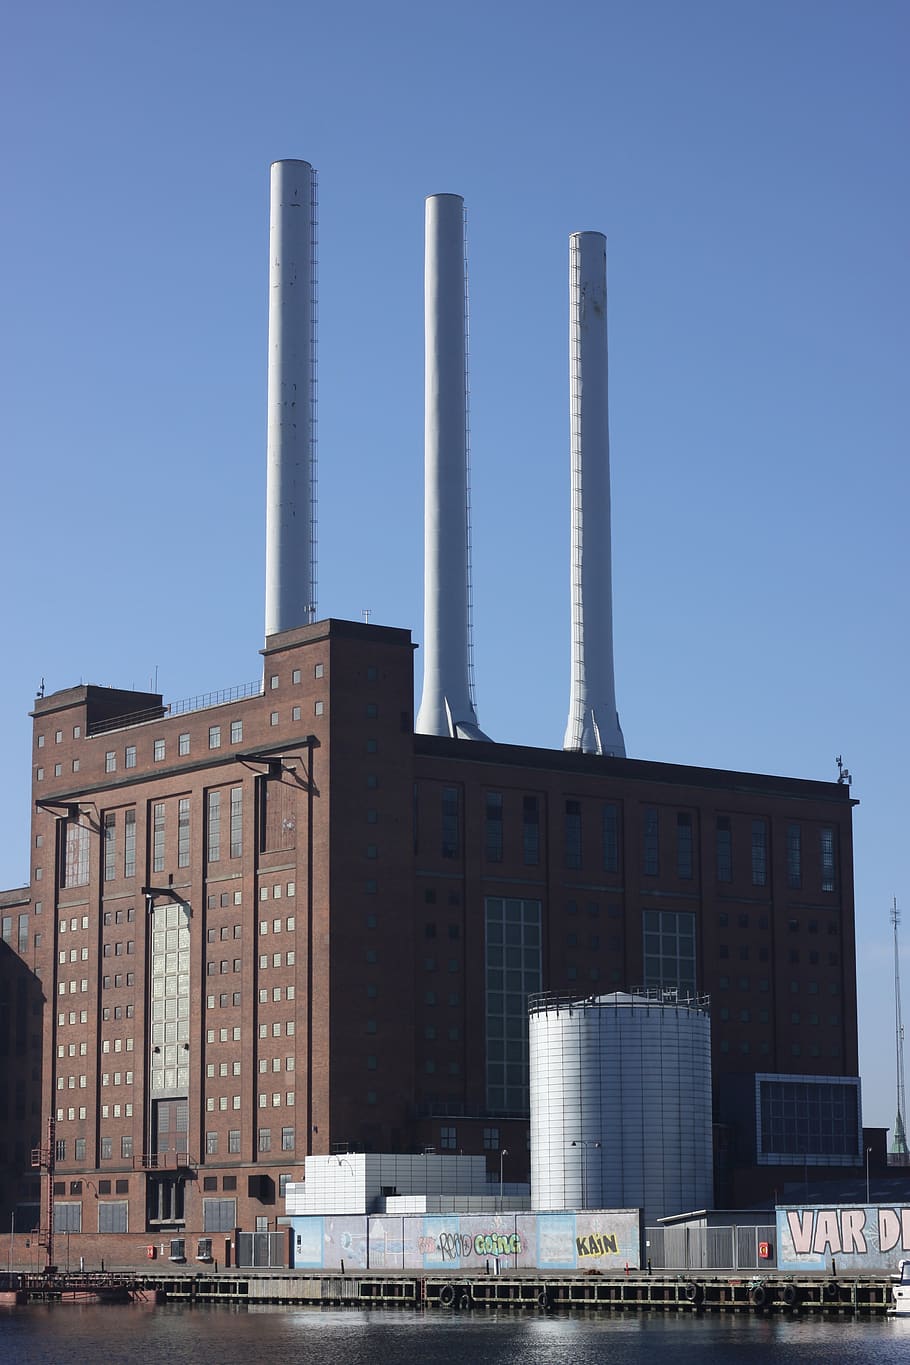 power plant, energy, power, electricity, sky, environment, technology, factory, power supply, chimneys